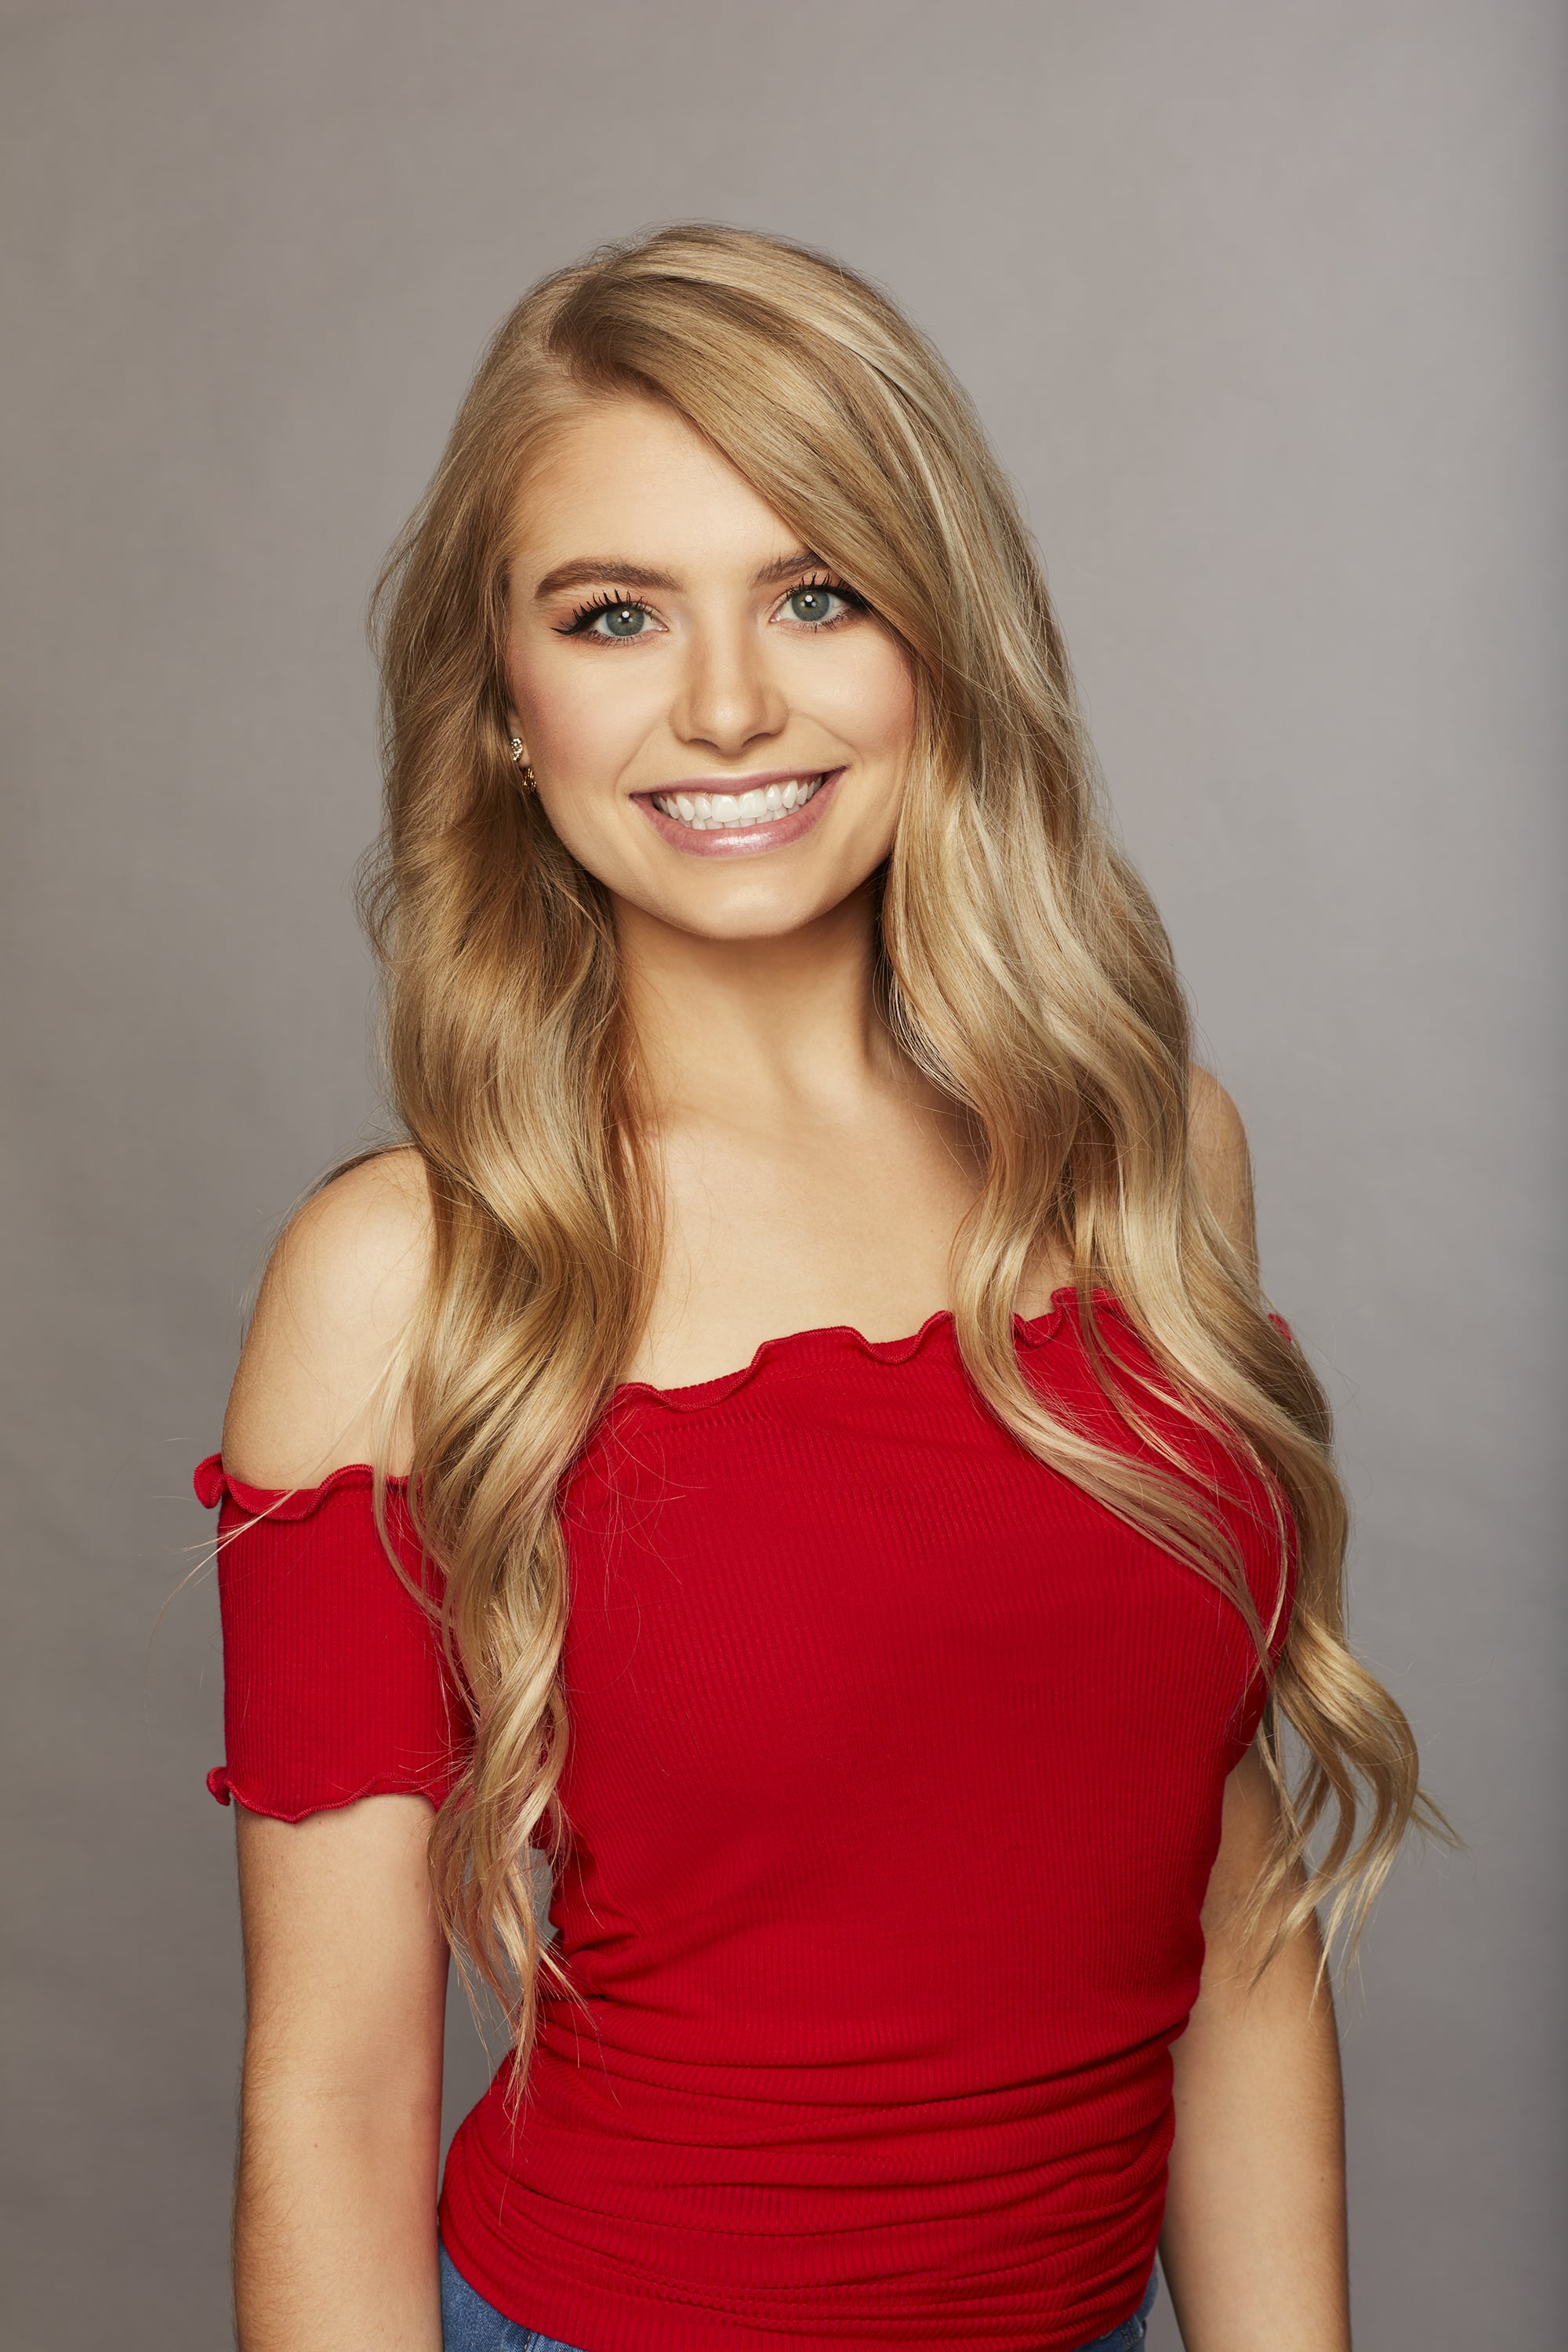 THE BACHELOR - What does a pageant star who calls herself the